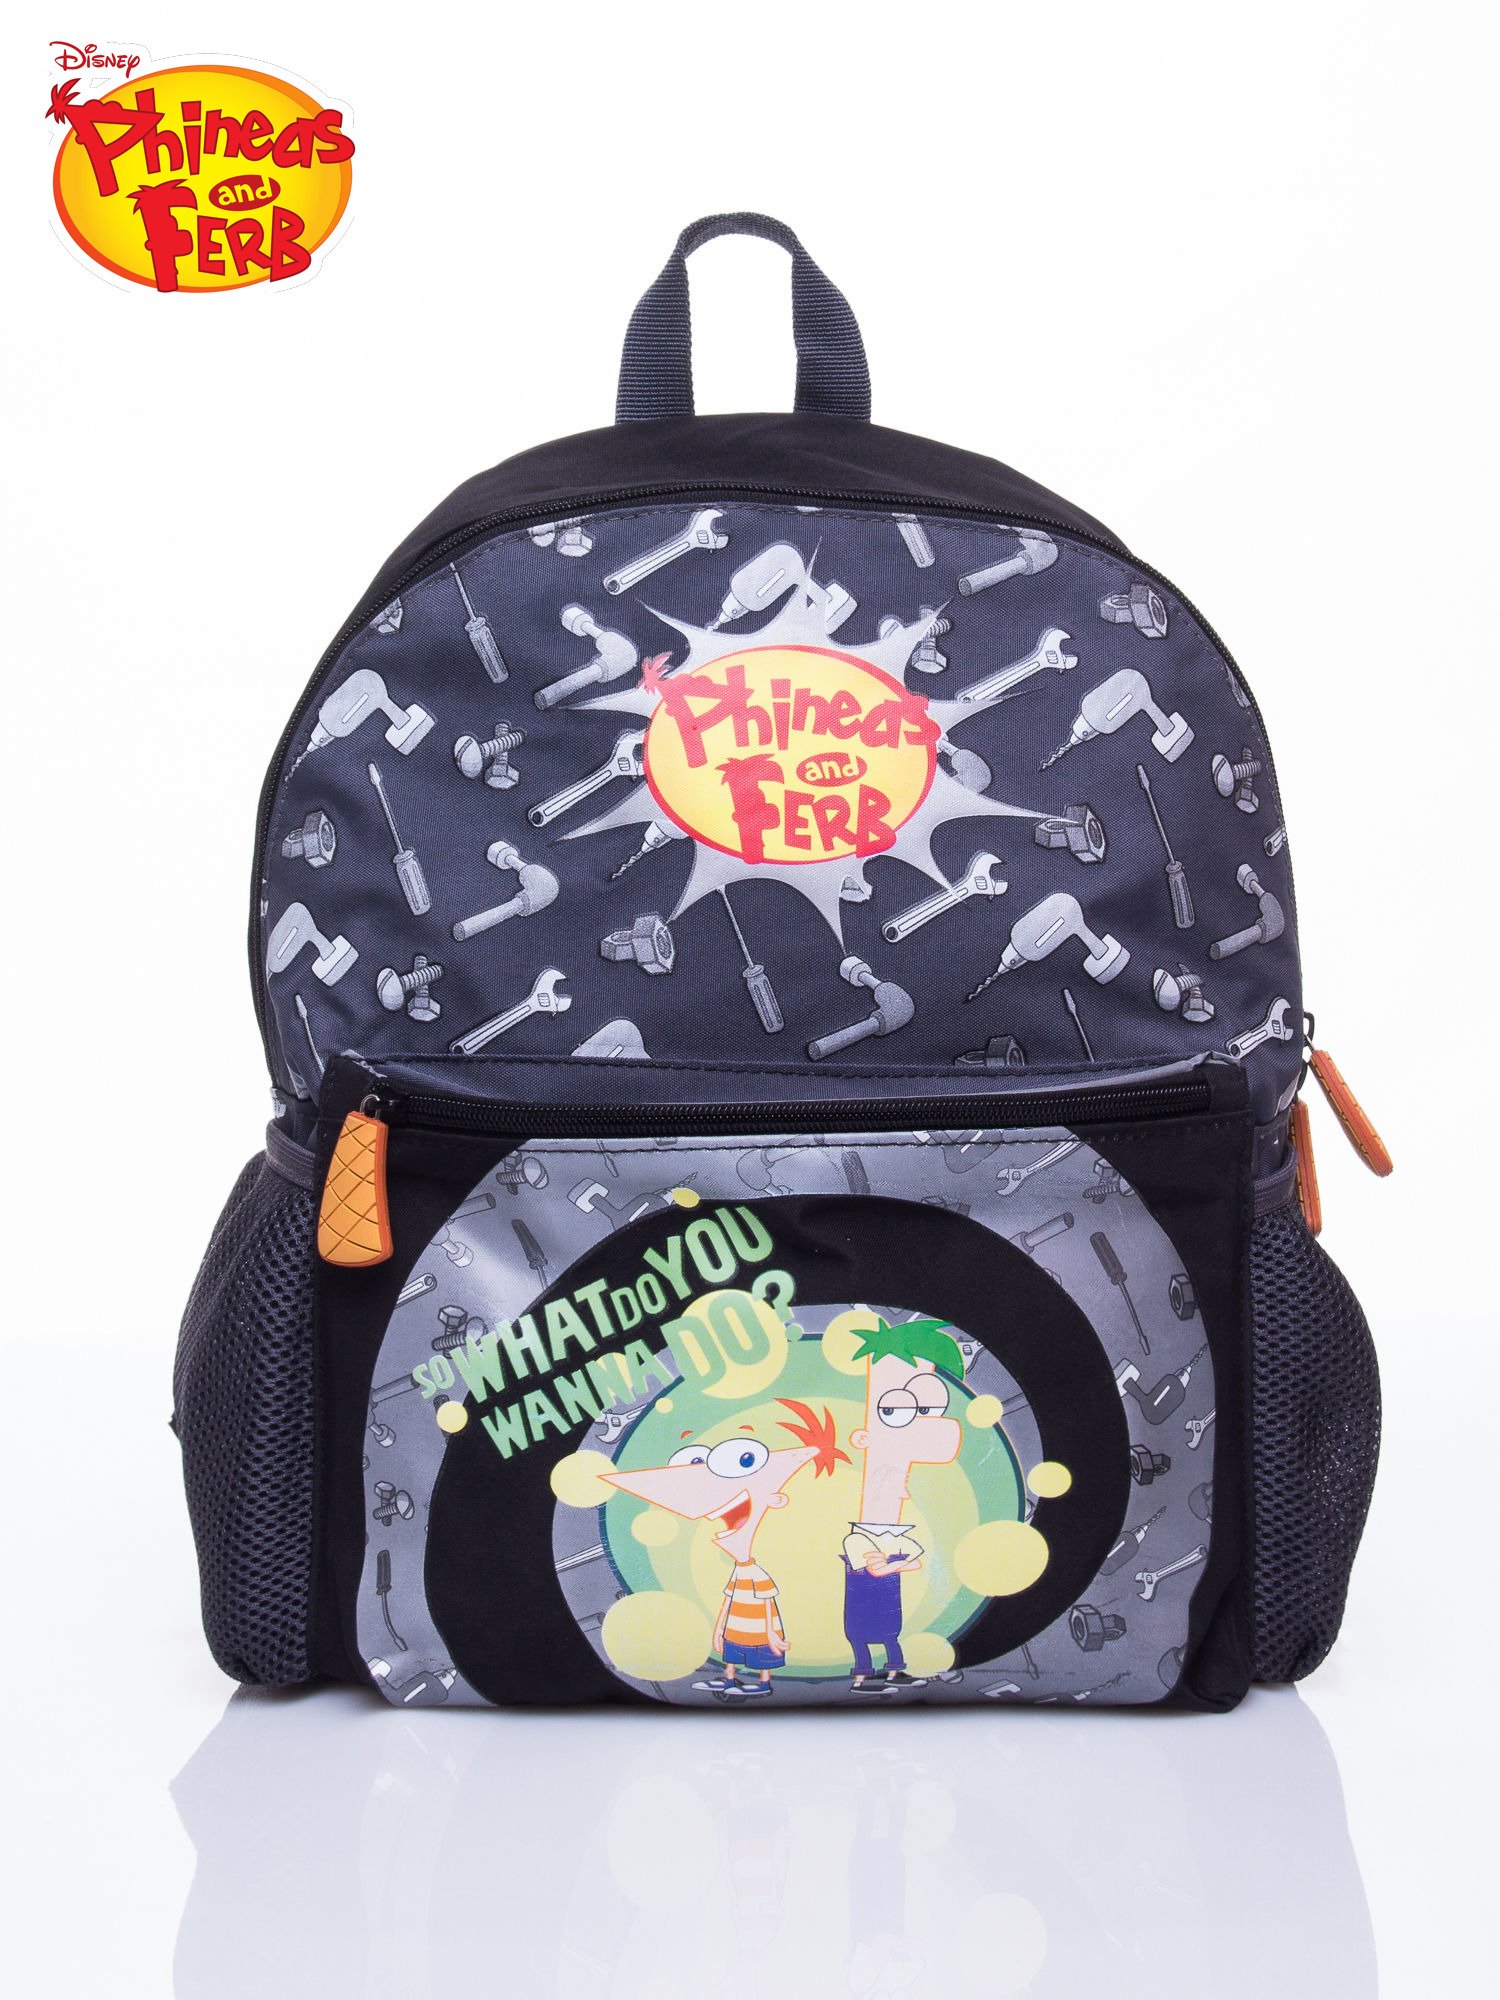 DISNEY Phineas and Ferb Gray School Backpack